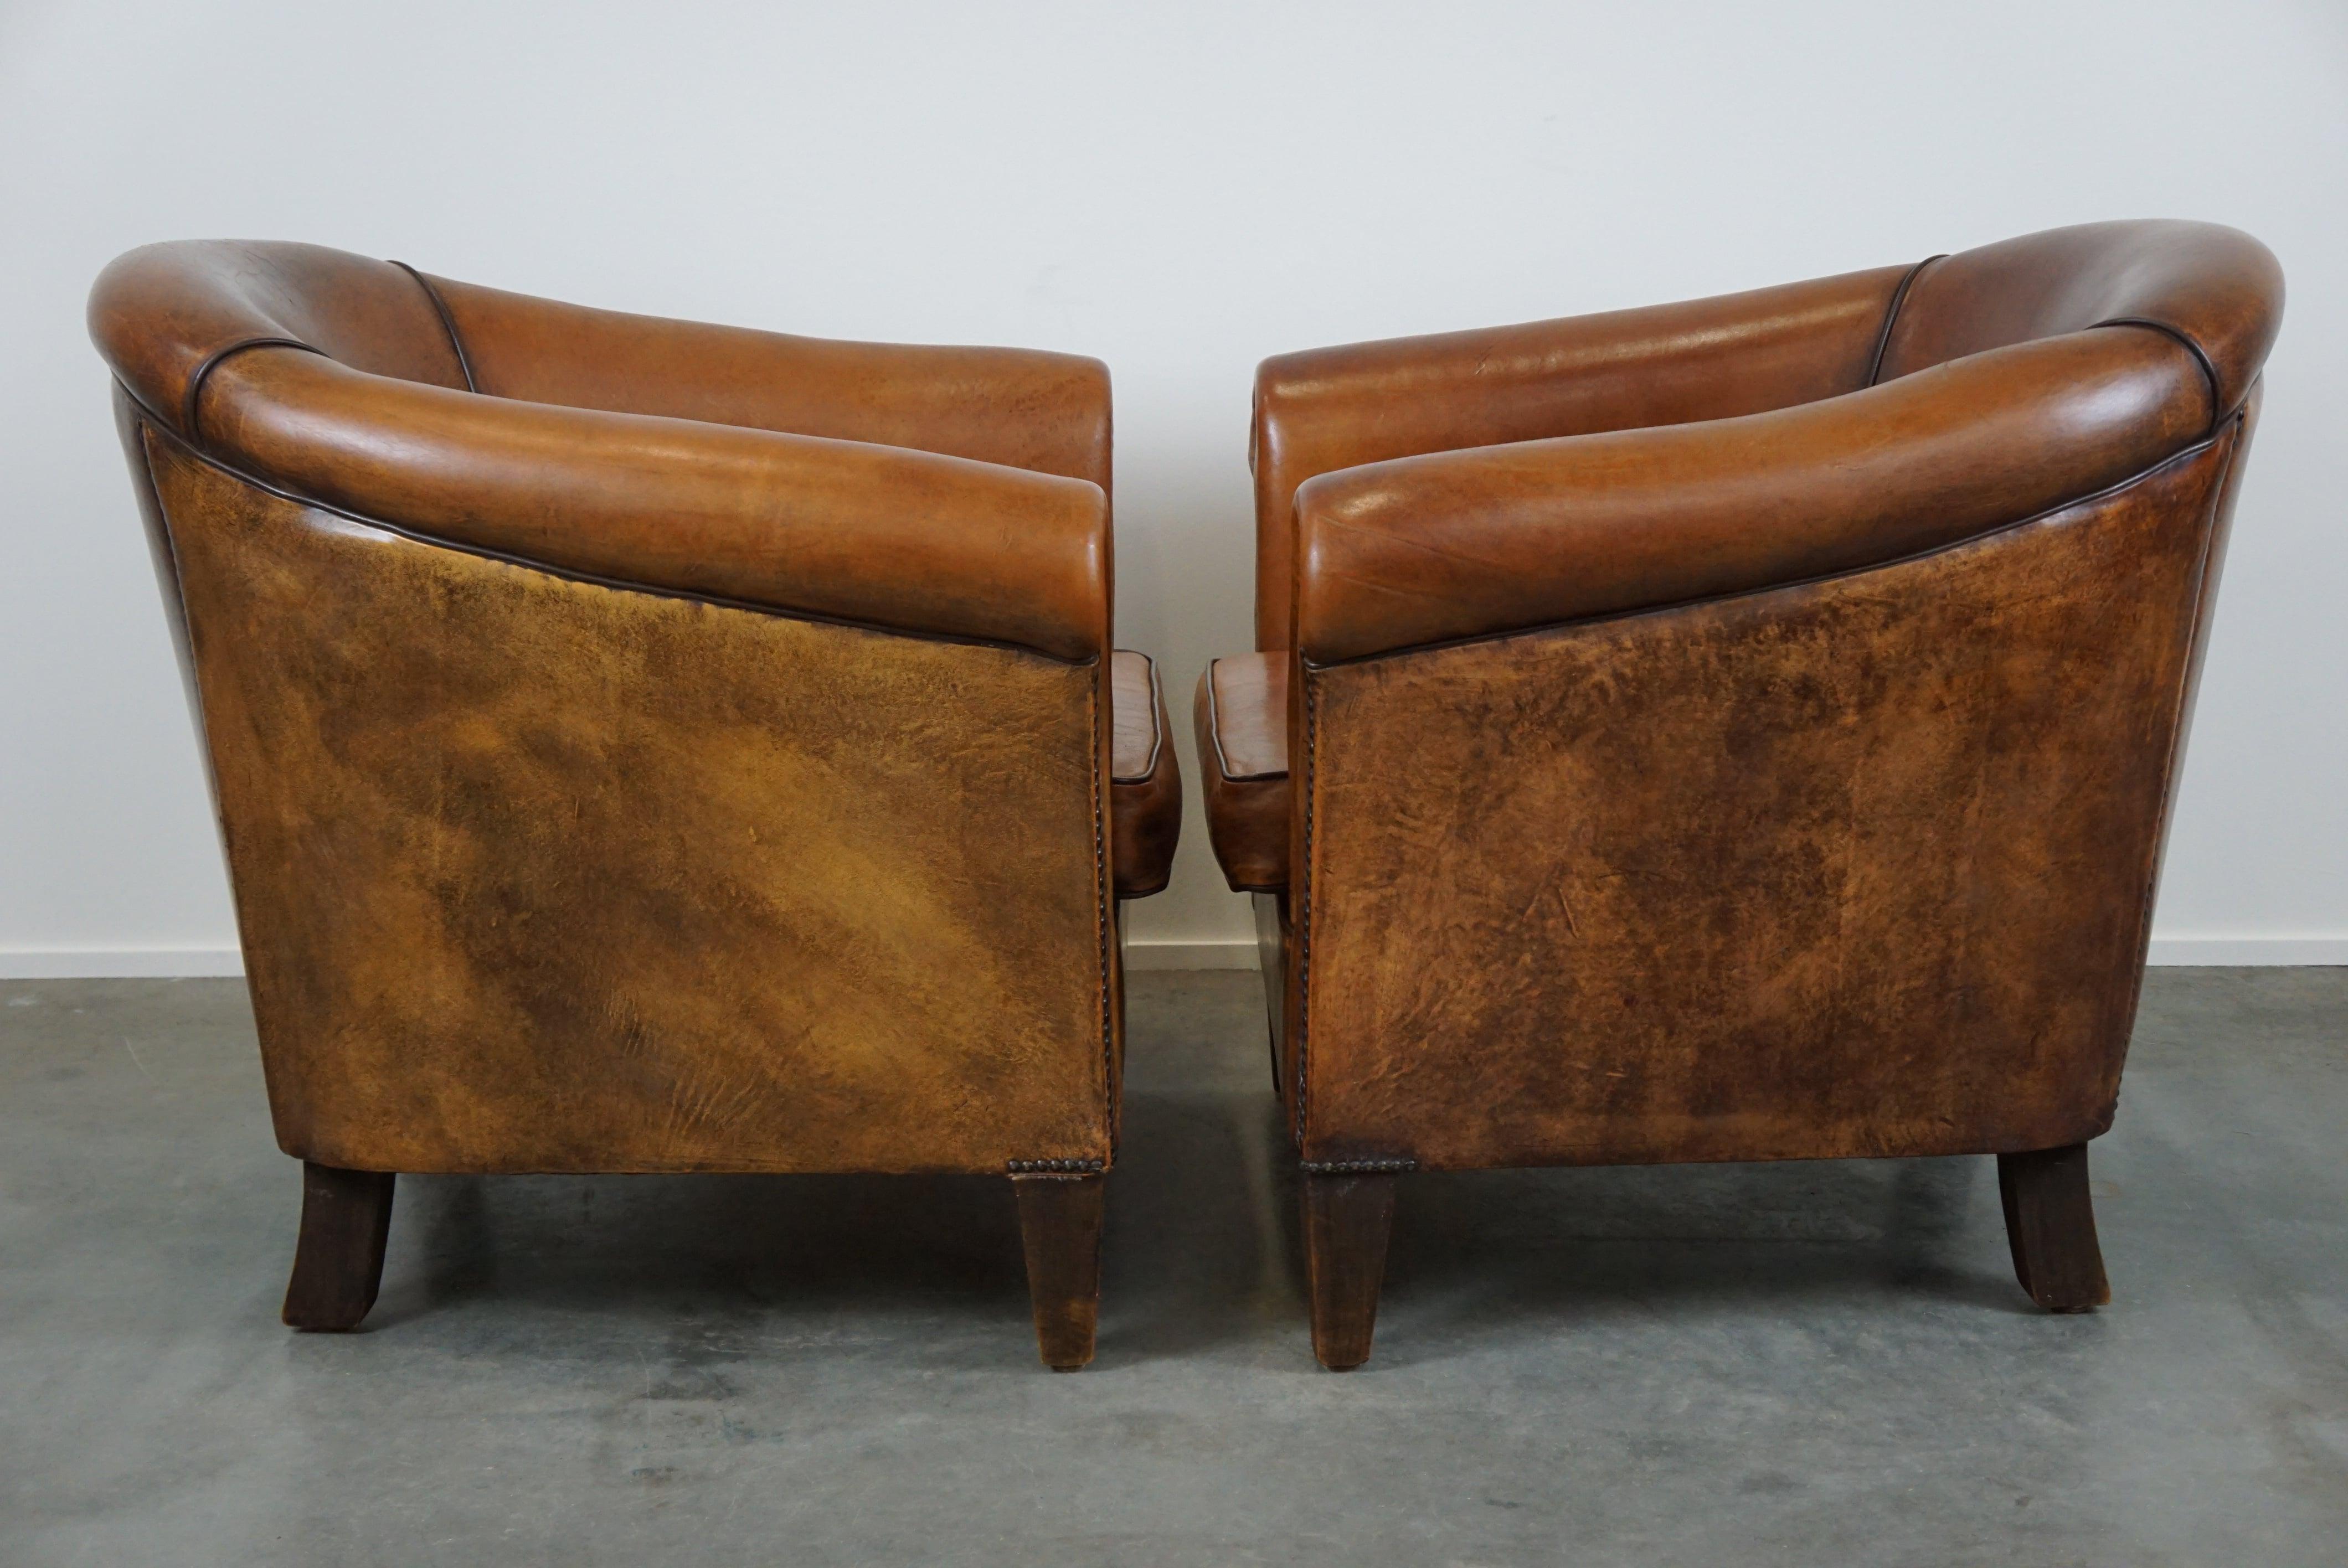 Sheep leather club armchairs are already a beloved item on their own, but as a set of two, they're even more desirable. This highly sought-after set has a comfortable seat and a beautiful appearance, just as enthusiasts like to see them. Apart from